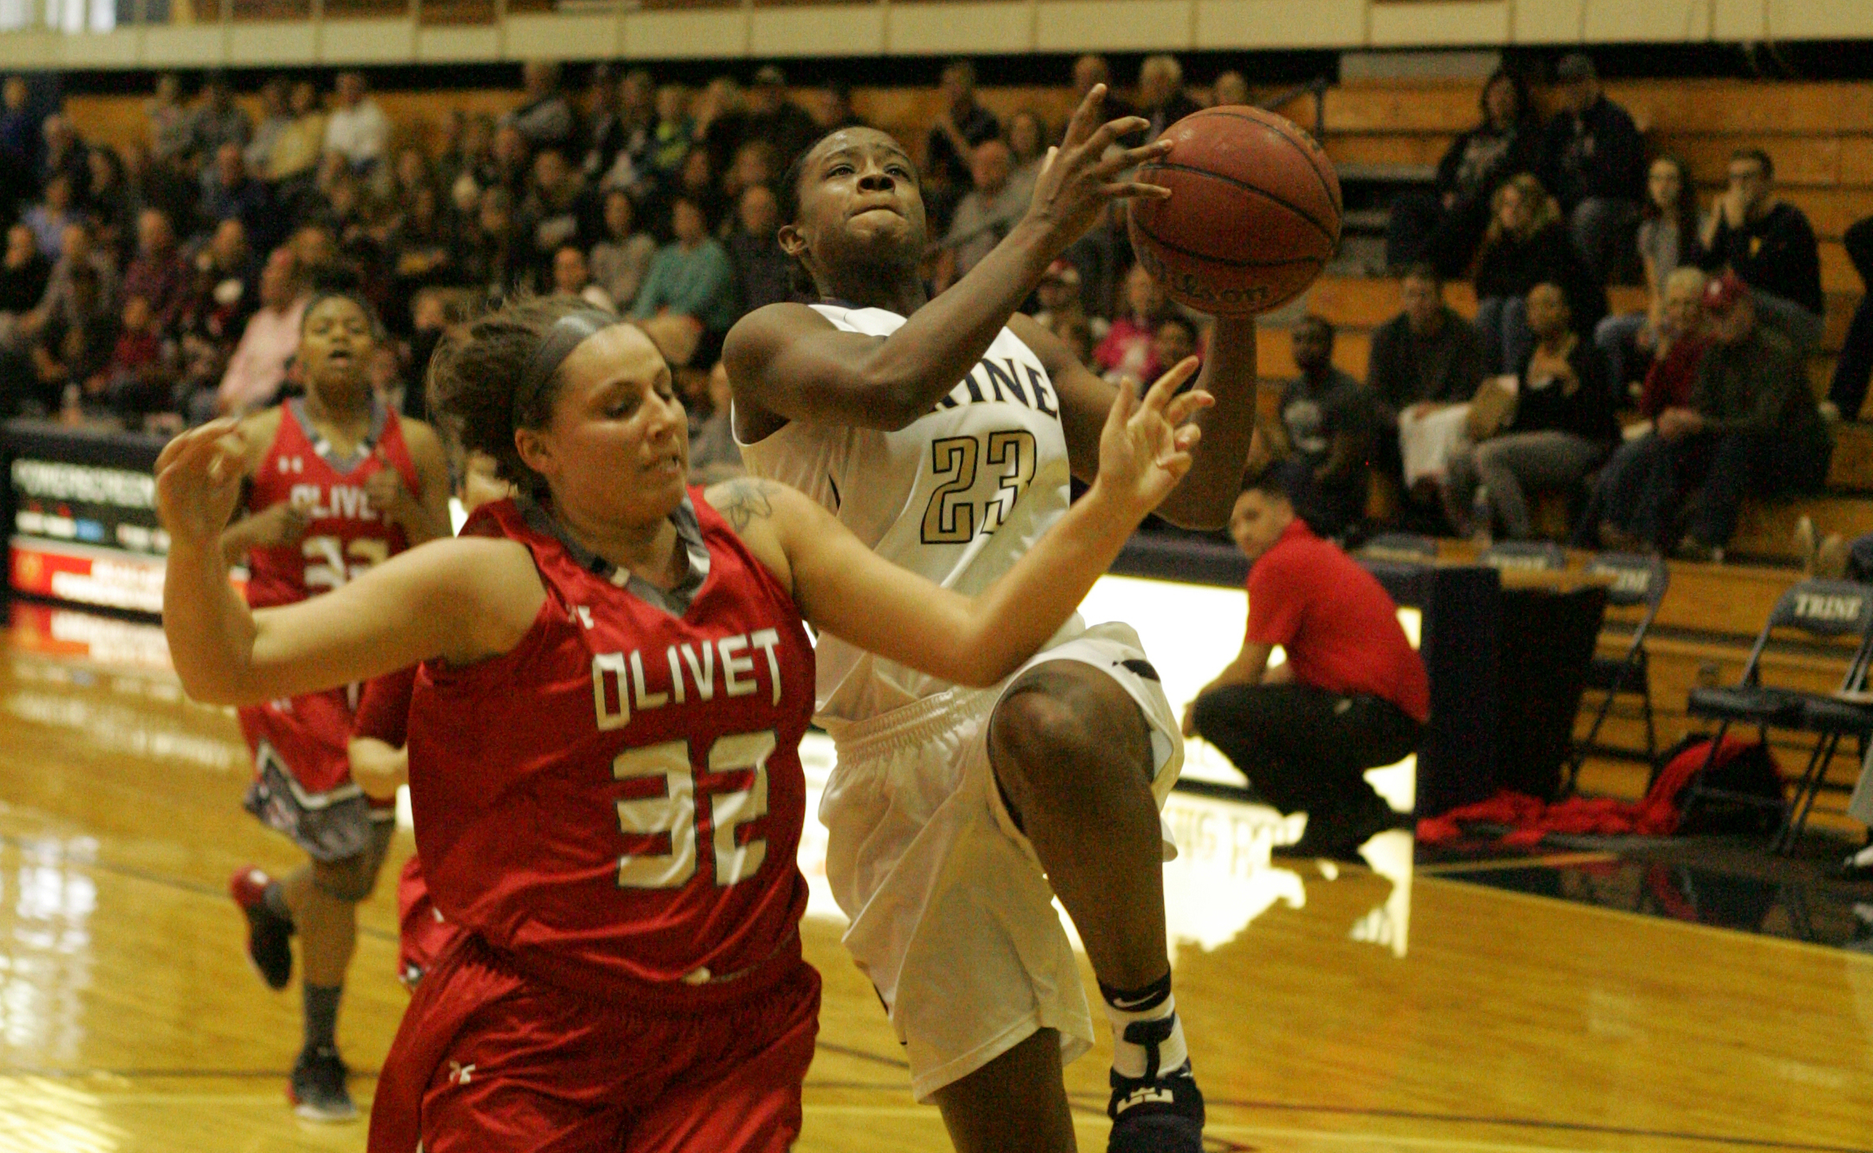 Women's Basketball Off to its Best Start Since 2000-01 with Win over Defiance